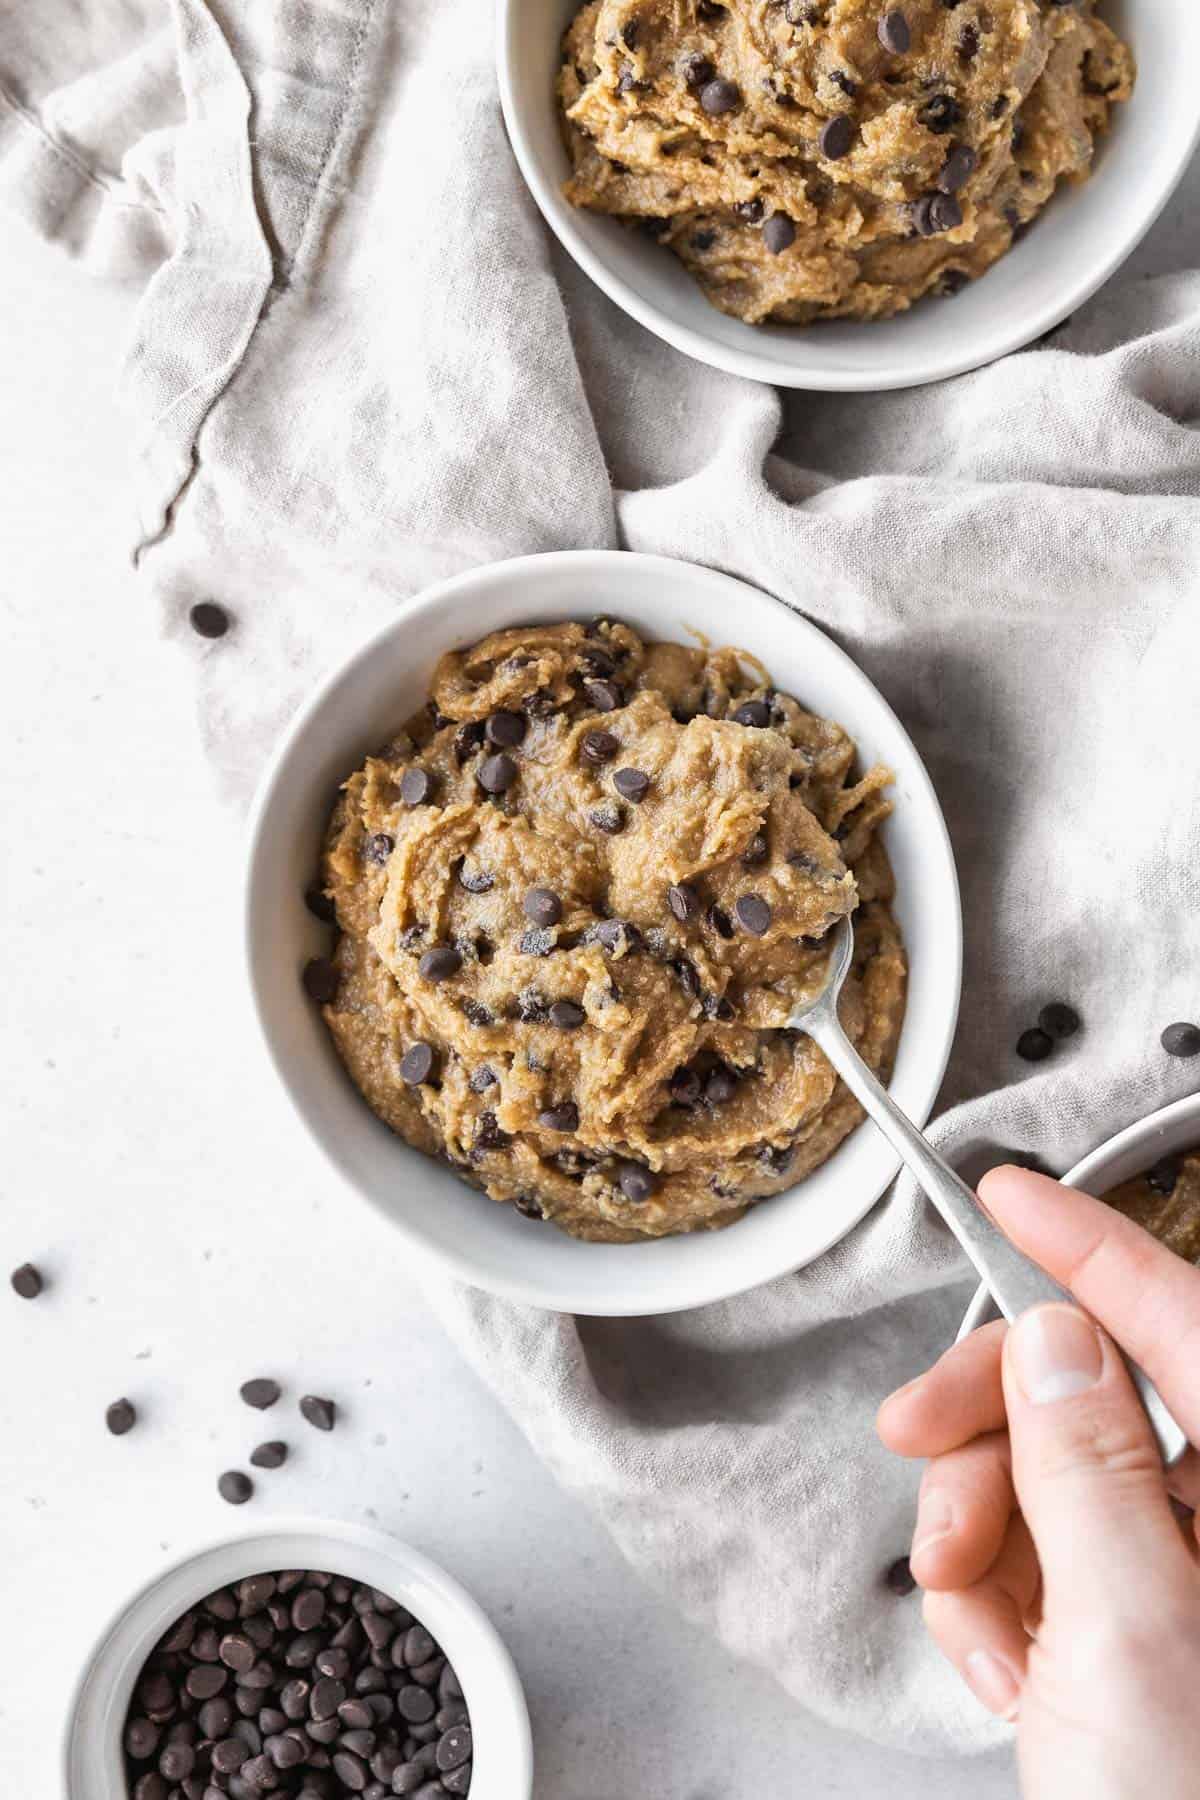 Hand taking a spoonful of dairy-free edible cookie dough from the bowl.